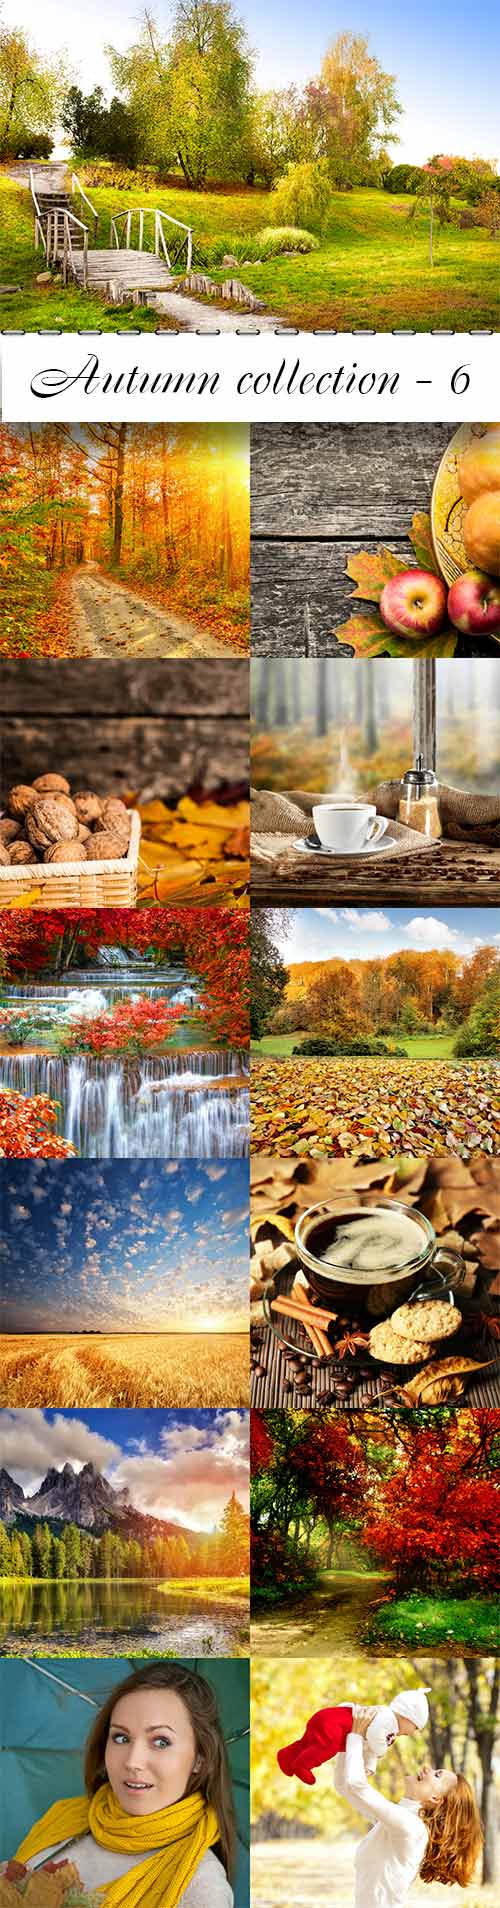 Autumn collection raster graphics - 6